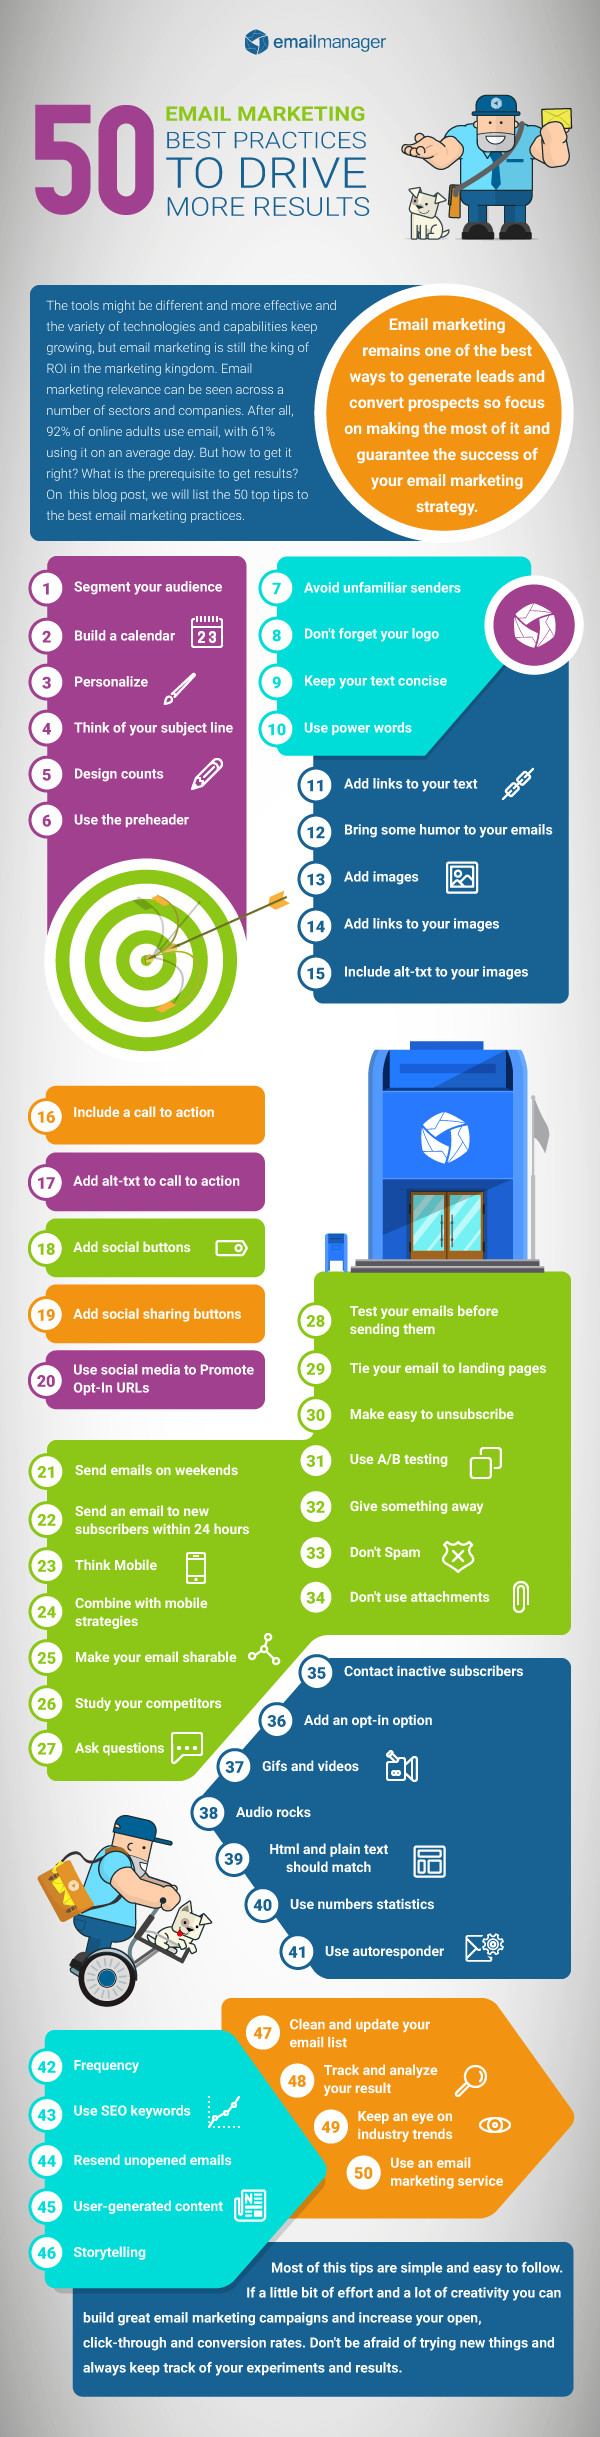 Infographic email marketing best practices